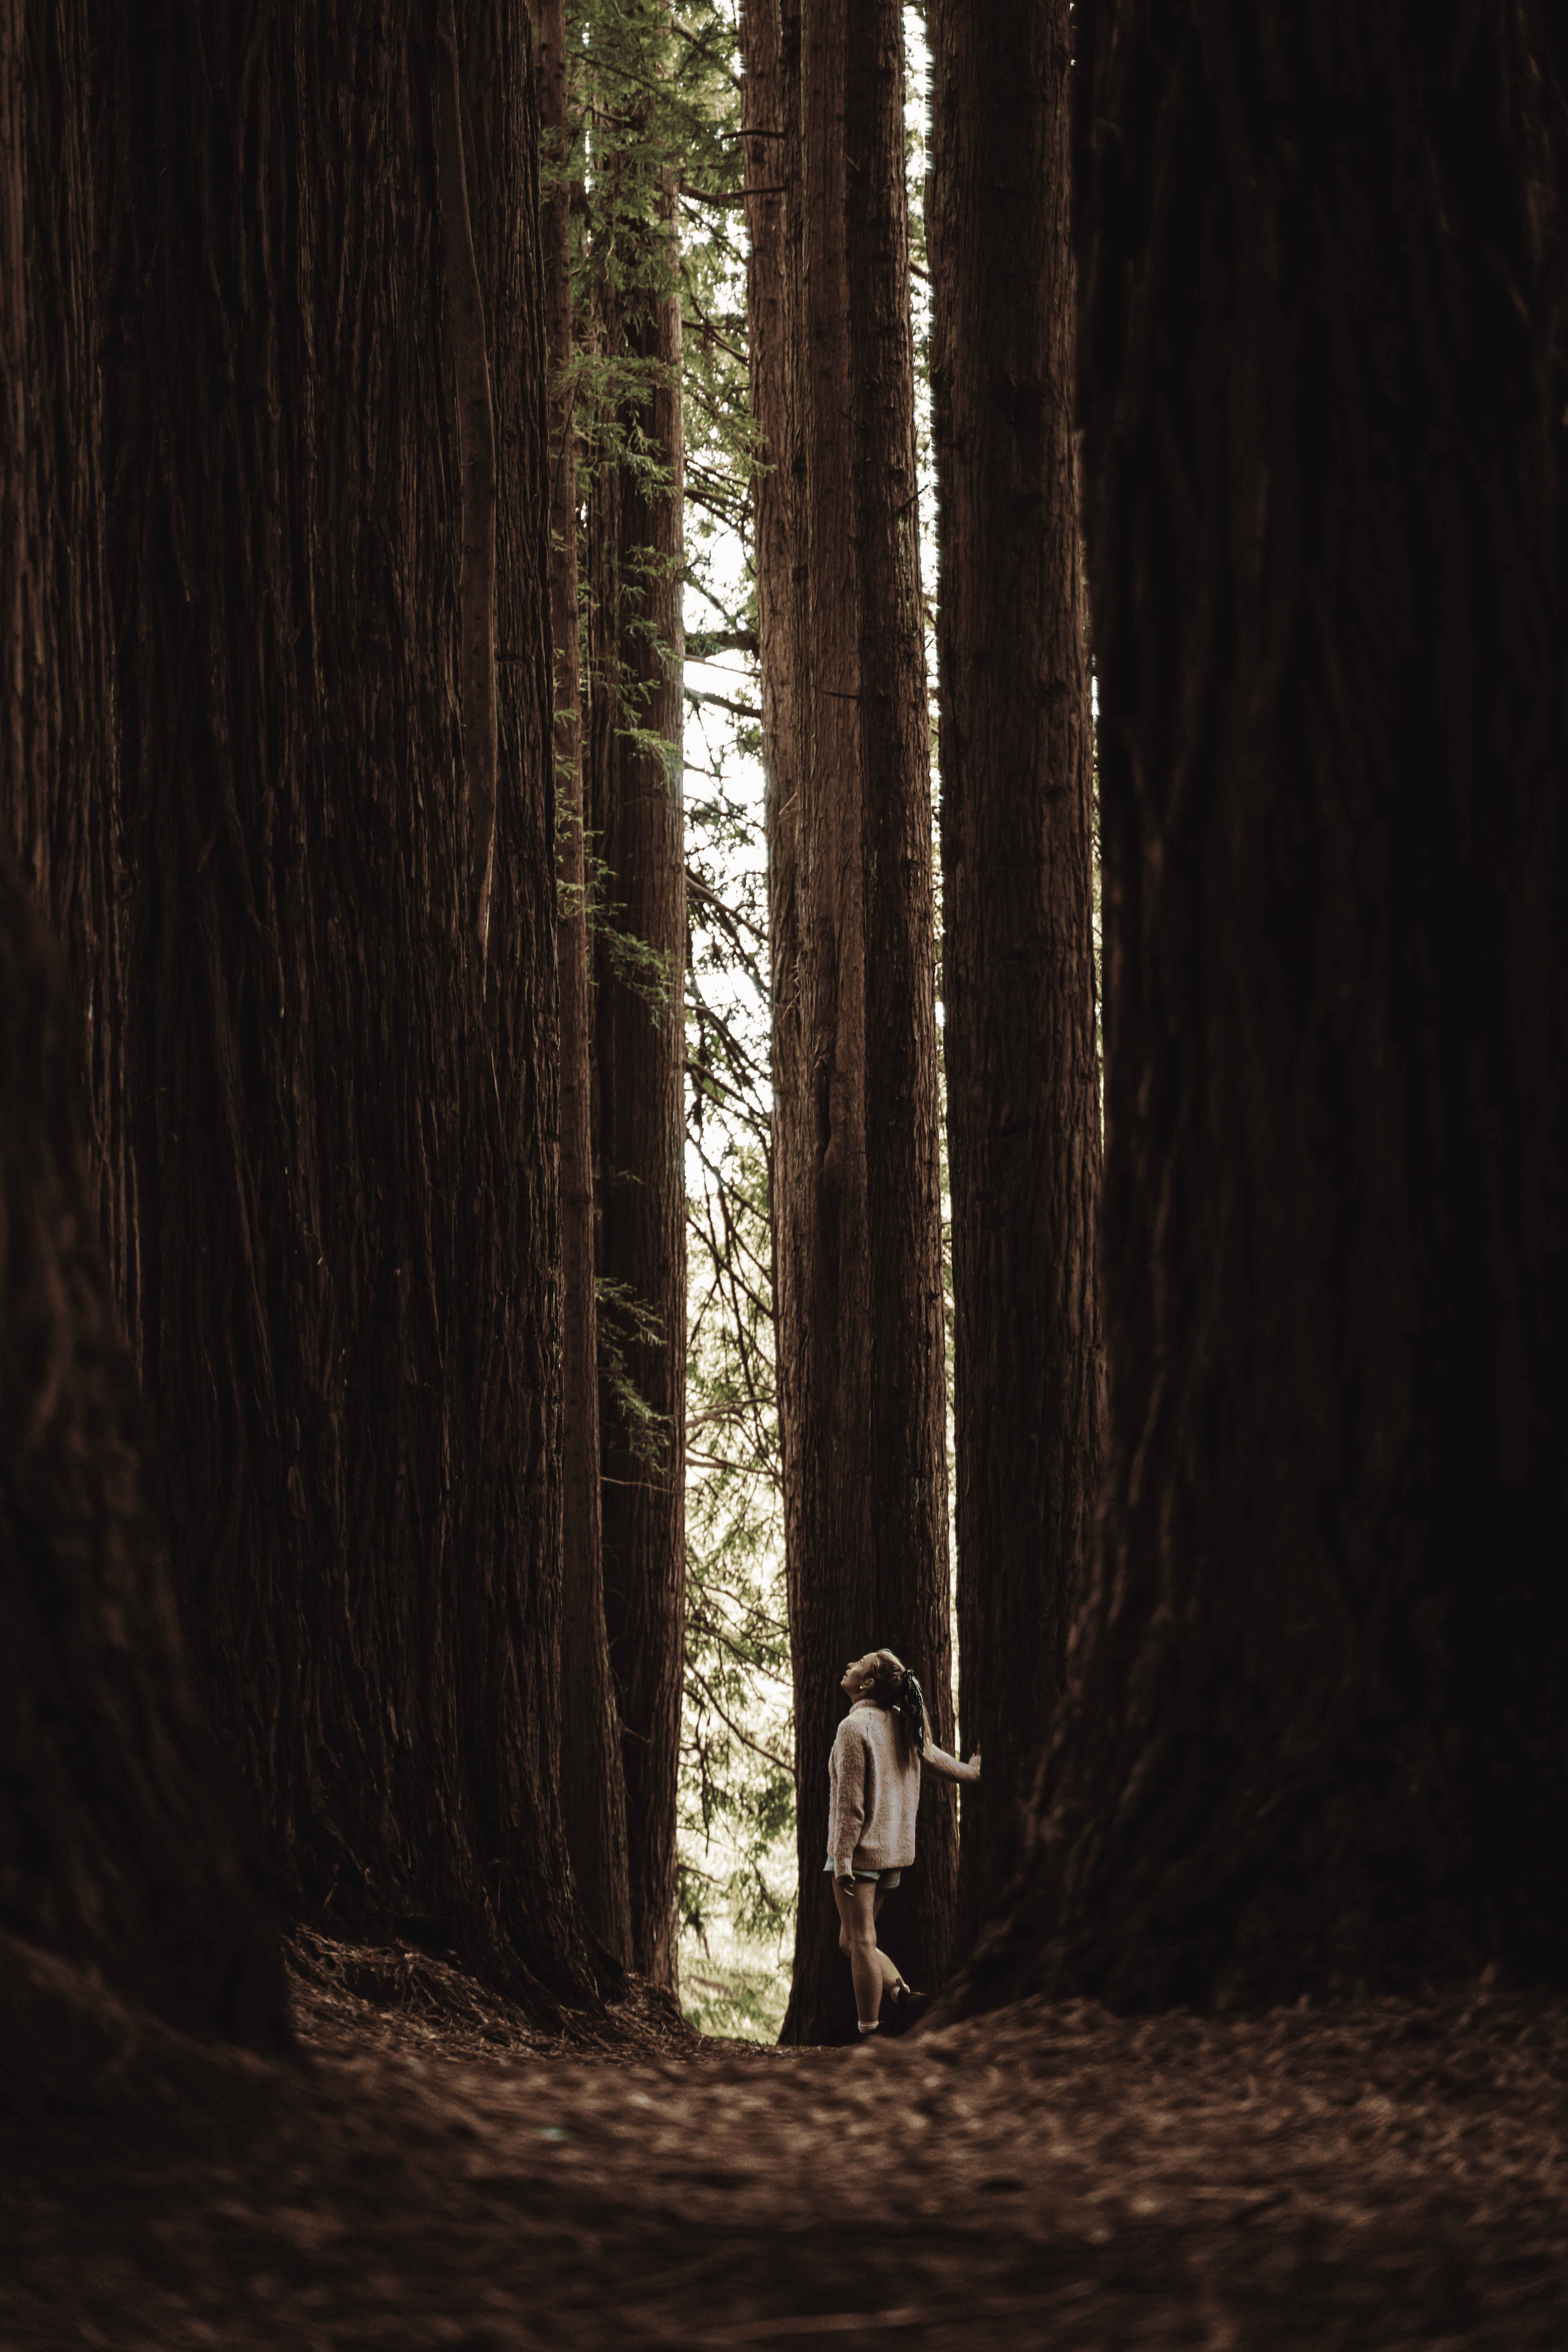 Dani is standing next to the towering Californian Redwood Forest